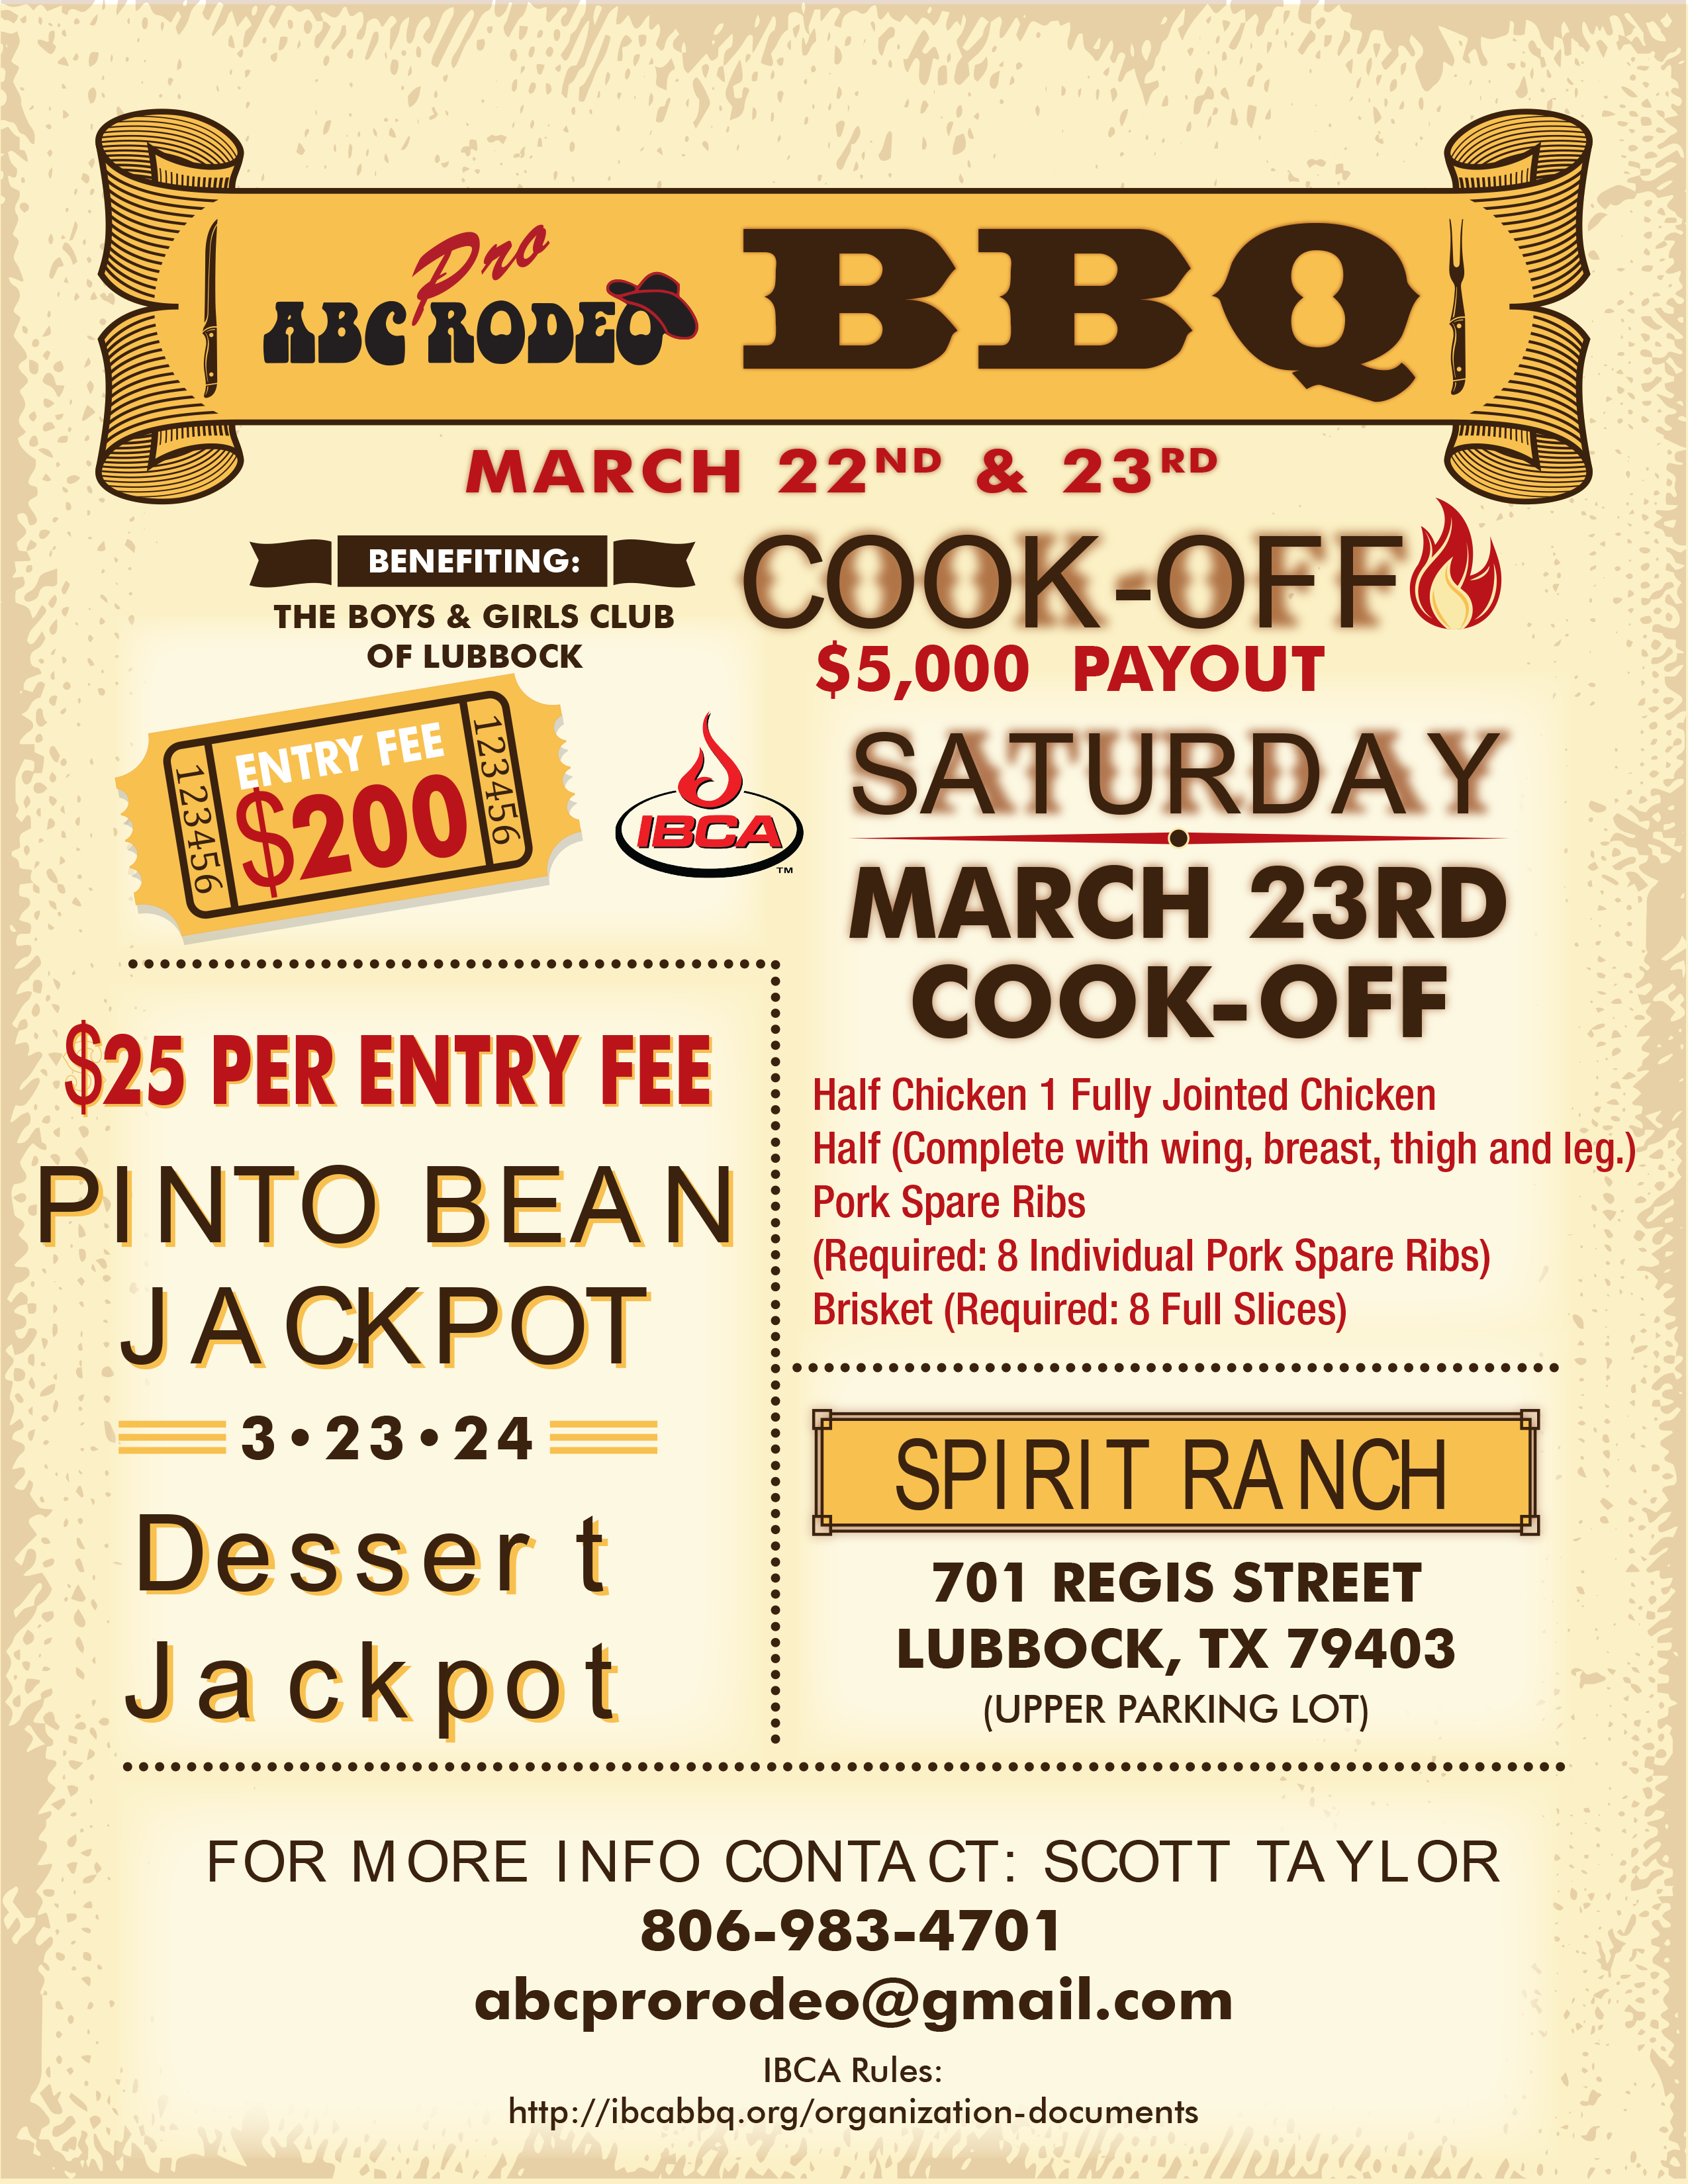 ABC Pro Rodeo BBQ Cook-Off. March 22 & 23. Entry Fee $200. 701 Regis Street Lubbock, TX 79403